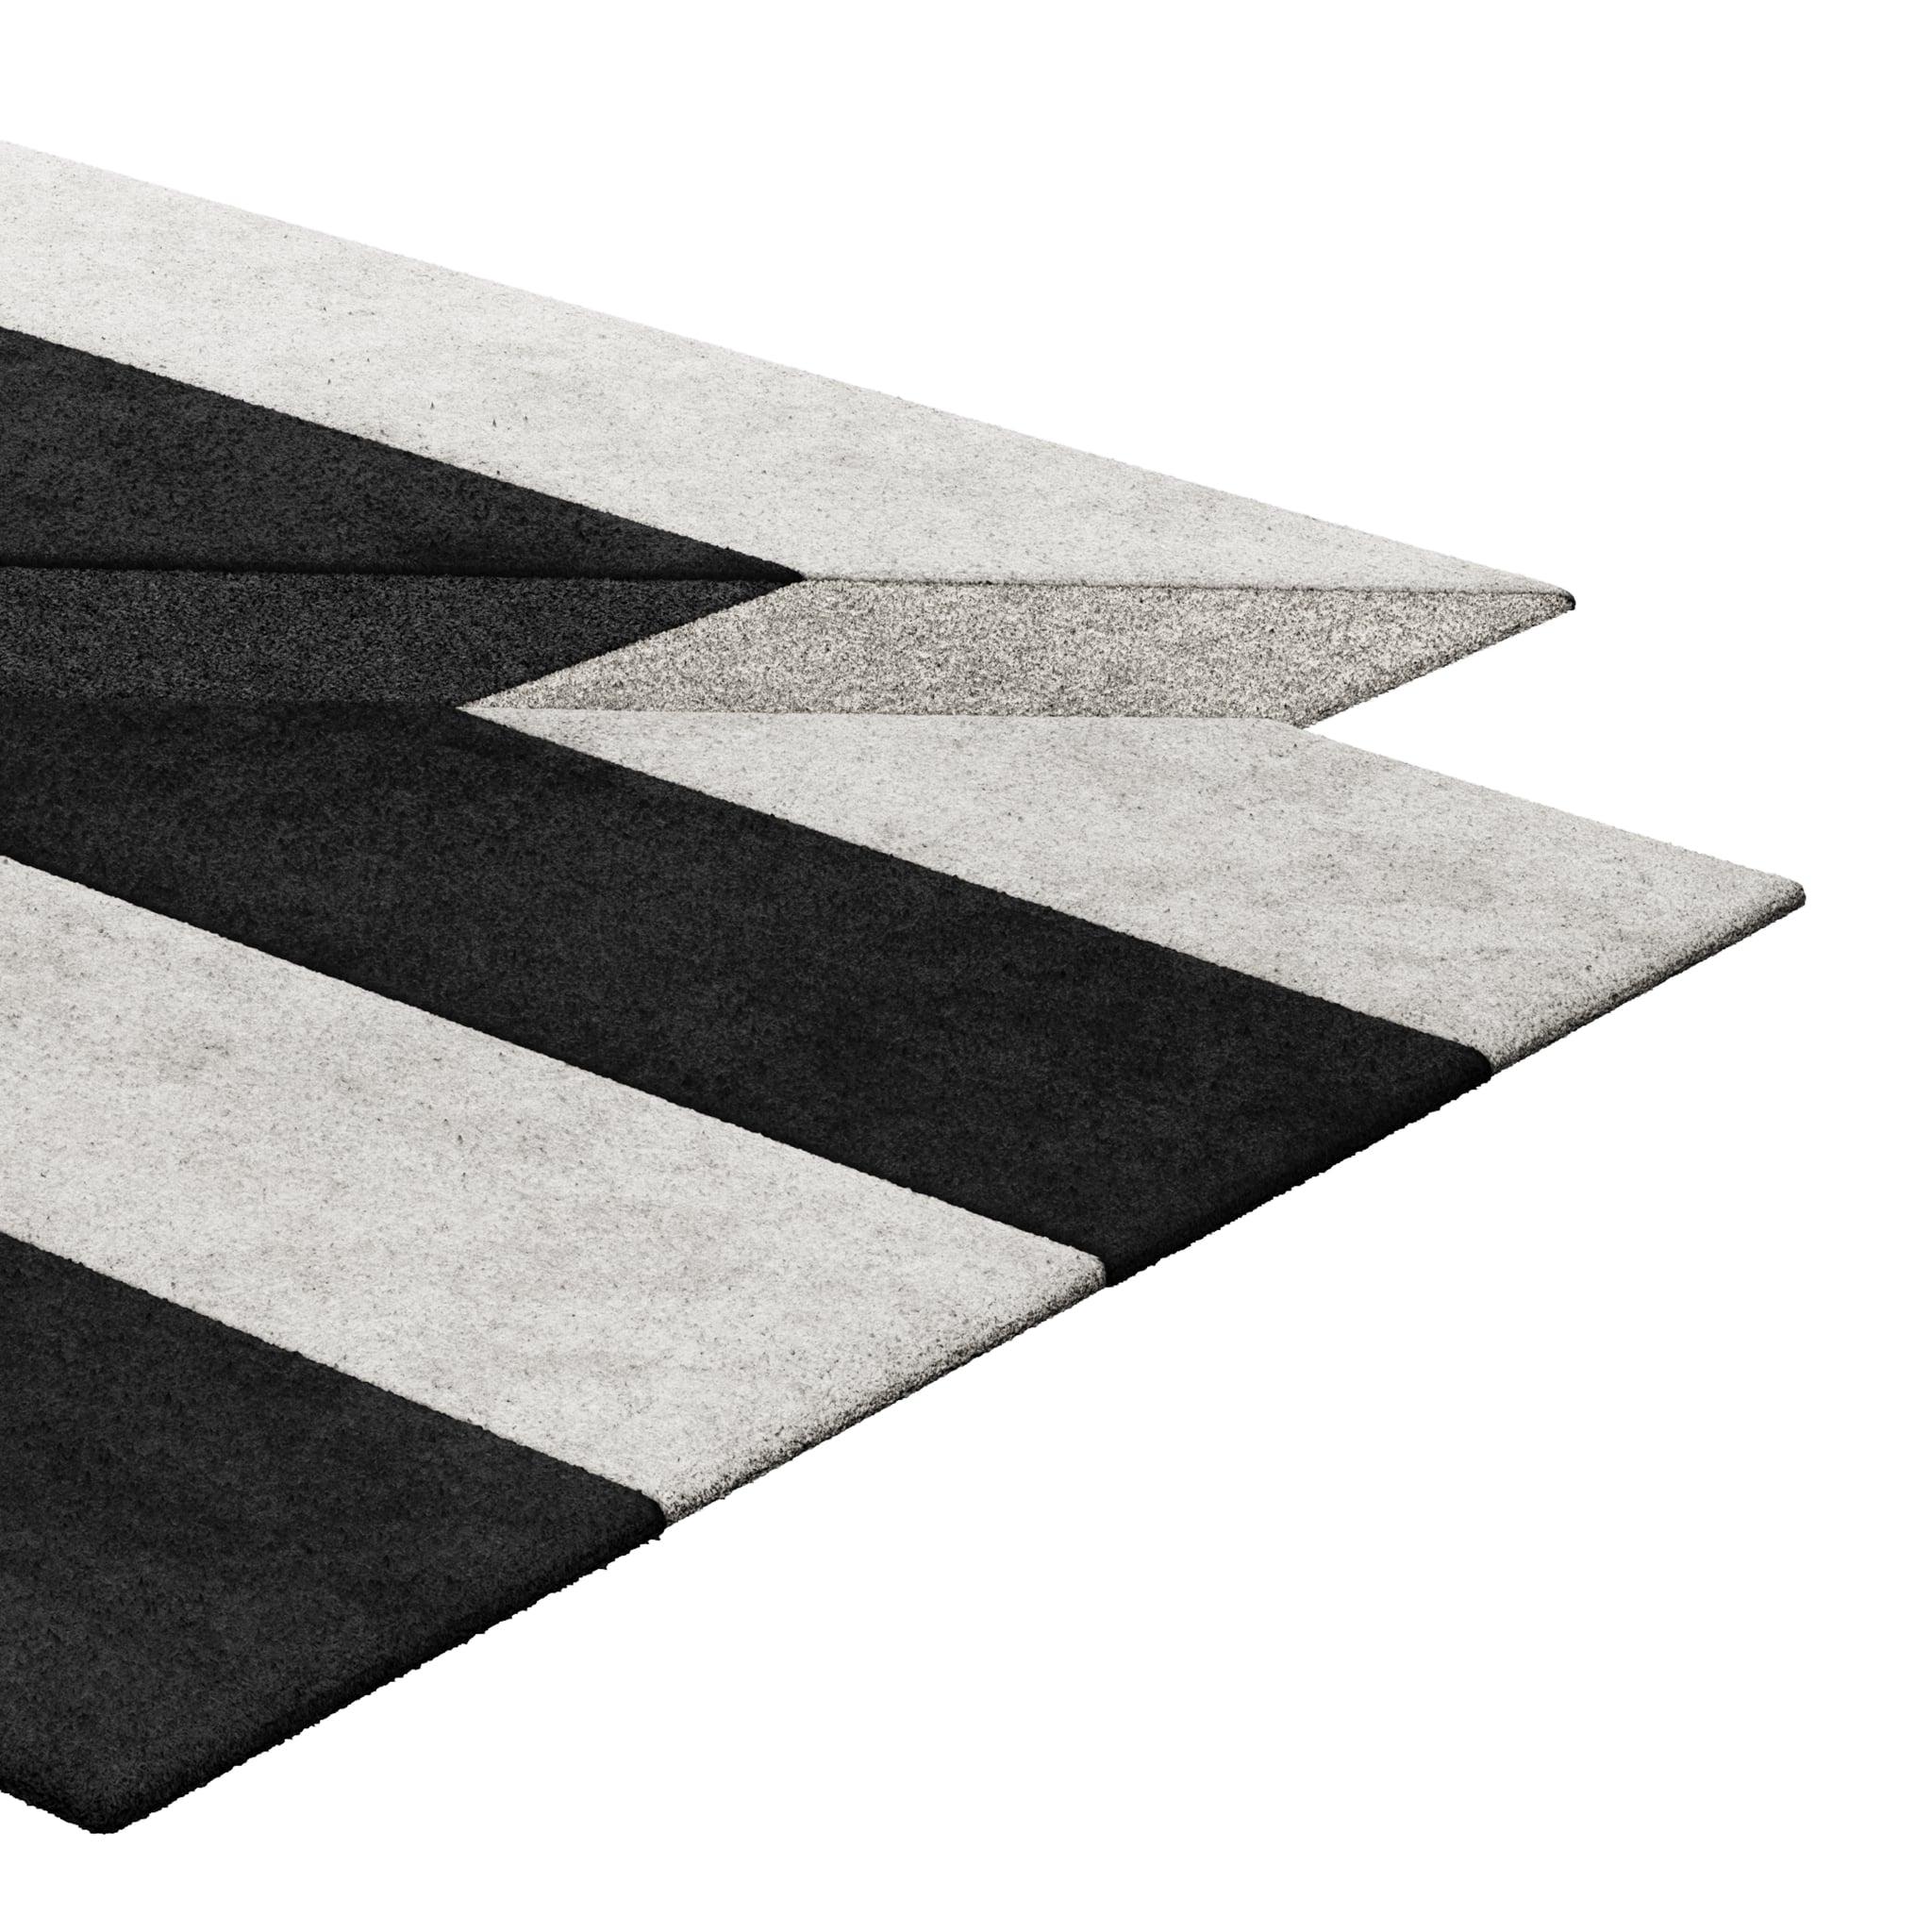 Tapis Retro #010 is a retro rug with an irregular shape and monochromatic hues. Inspired by architectural lines, this geometric rug makes a statement in any living space.

Using a 3D-tufted technique that combines cut and loop pile, the retro rug